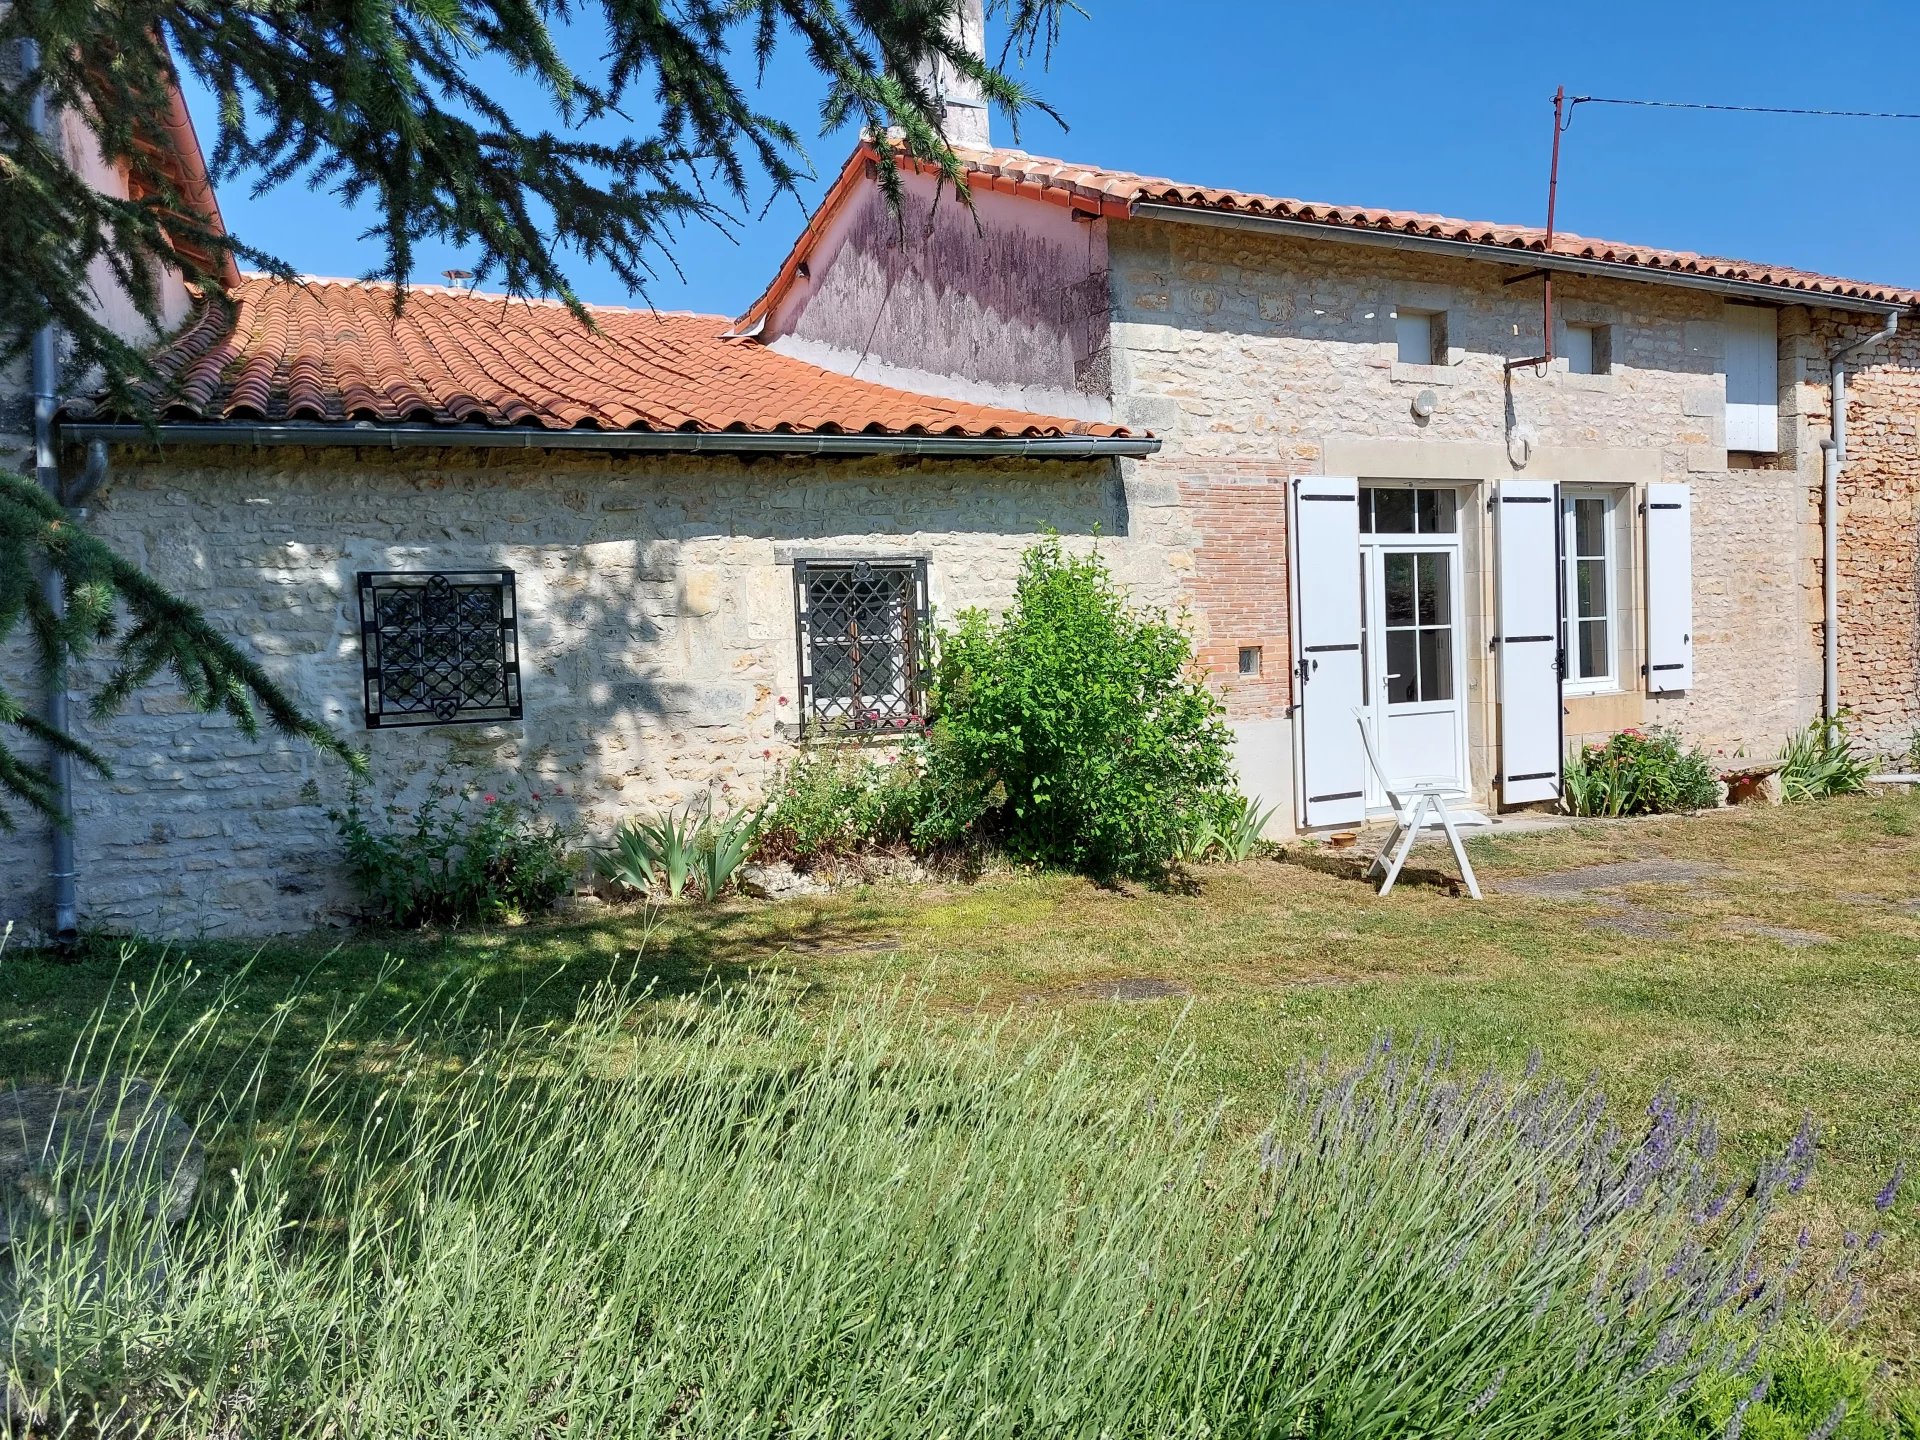 Stunning single storey stone character property with outbuildings - close to Ruffec